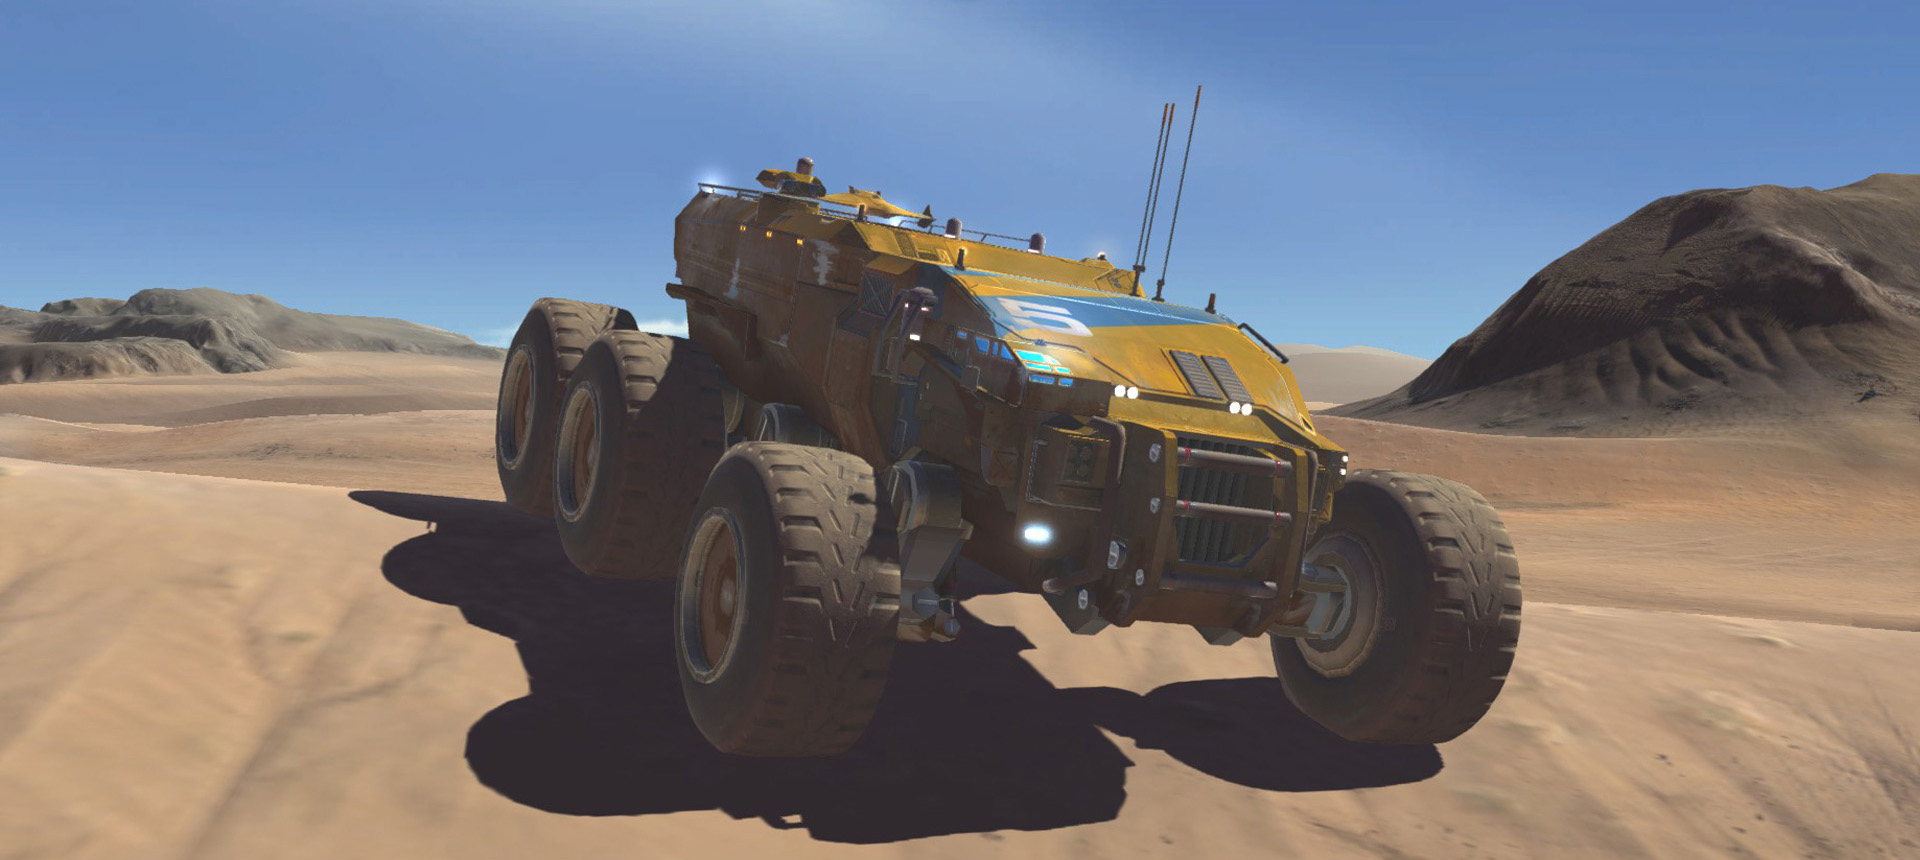 The incredible Homeworld: Deserts of Kharak is free on Epic Games